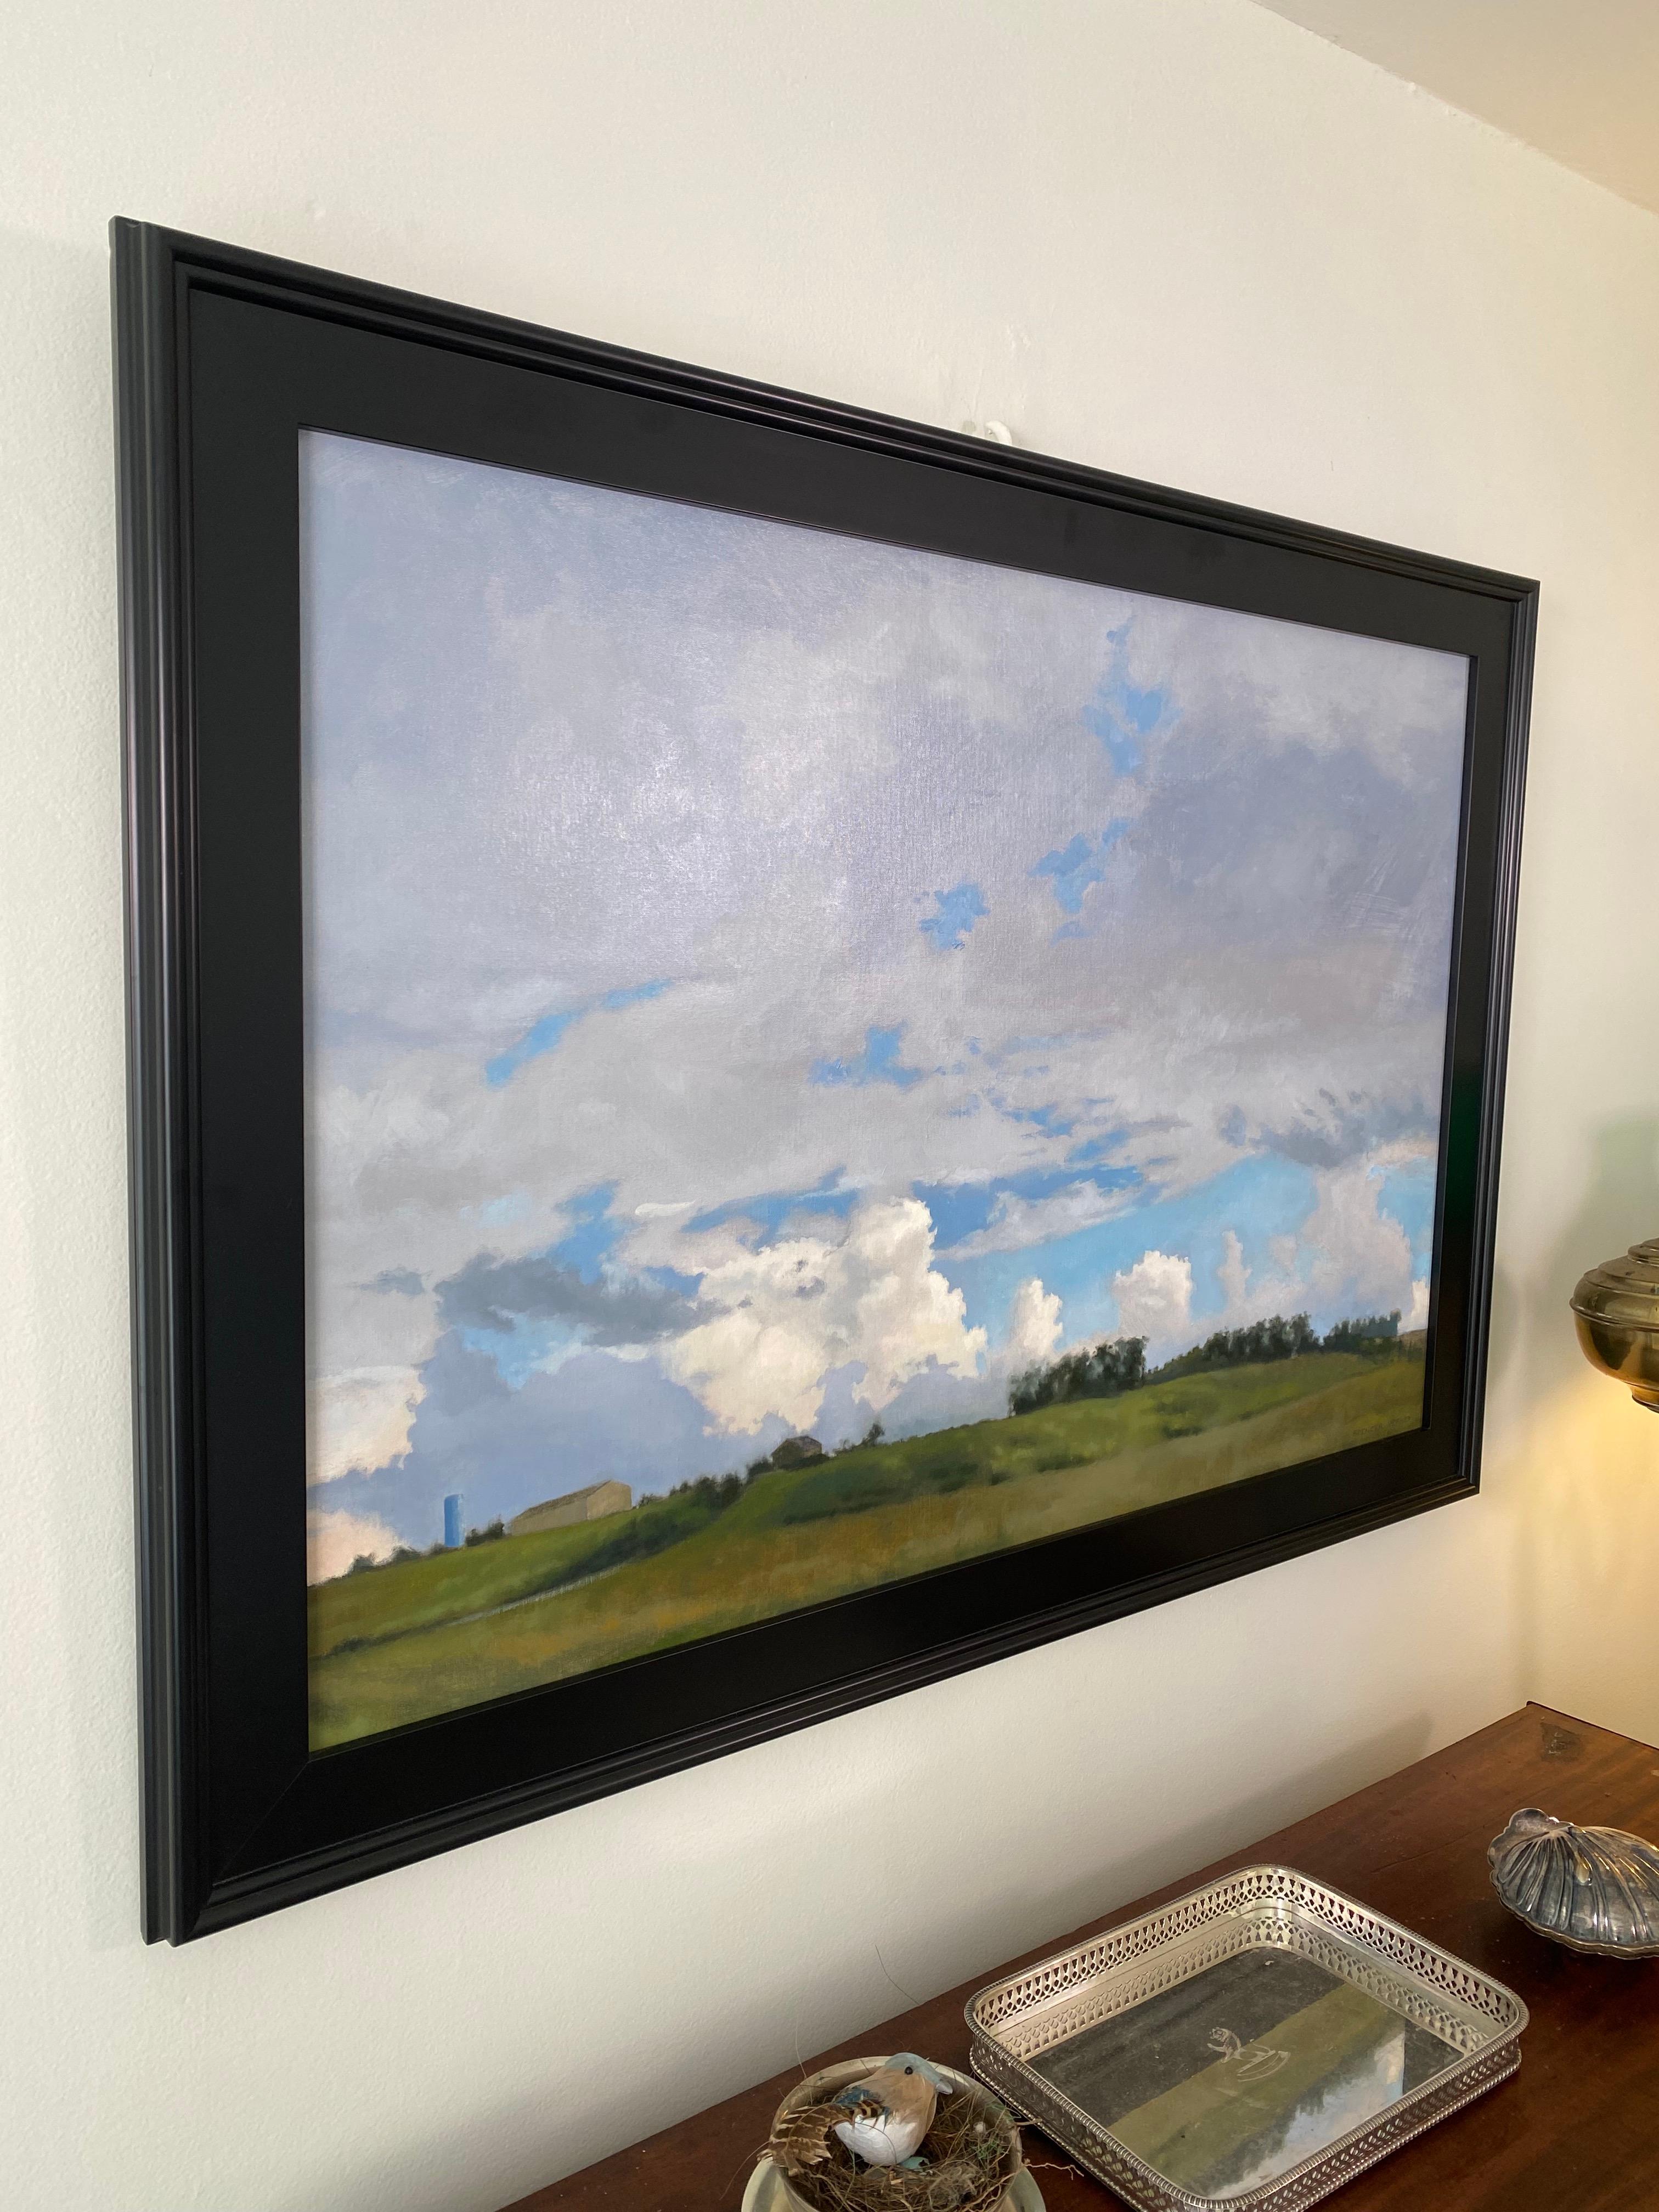 Newgarden
By Spencer Verney

At the end of the runway of Newgarden airport, a letterbox view of large thunderheads is visible beneath the cloud layer.

Oil on linen, mounted to a panel.

Please get in touch with any questions.